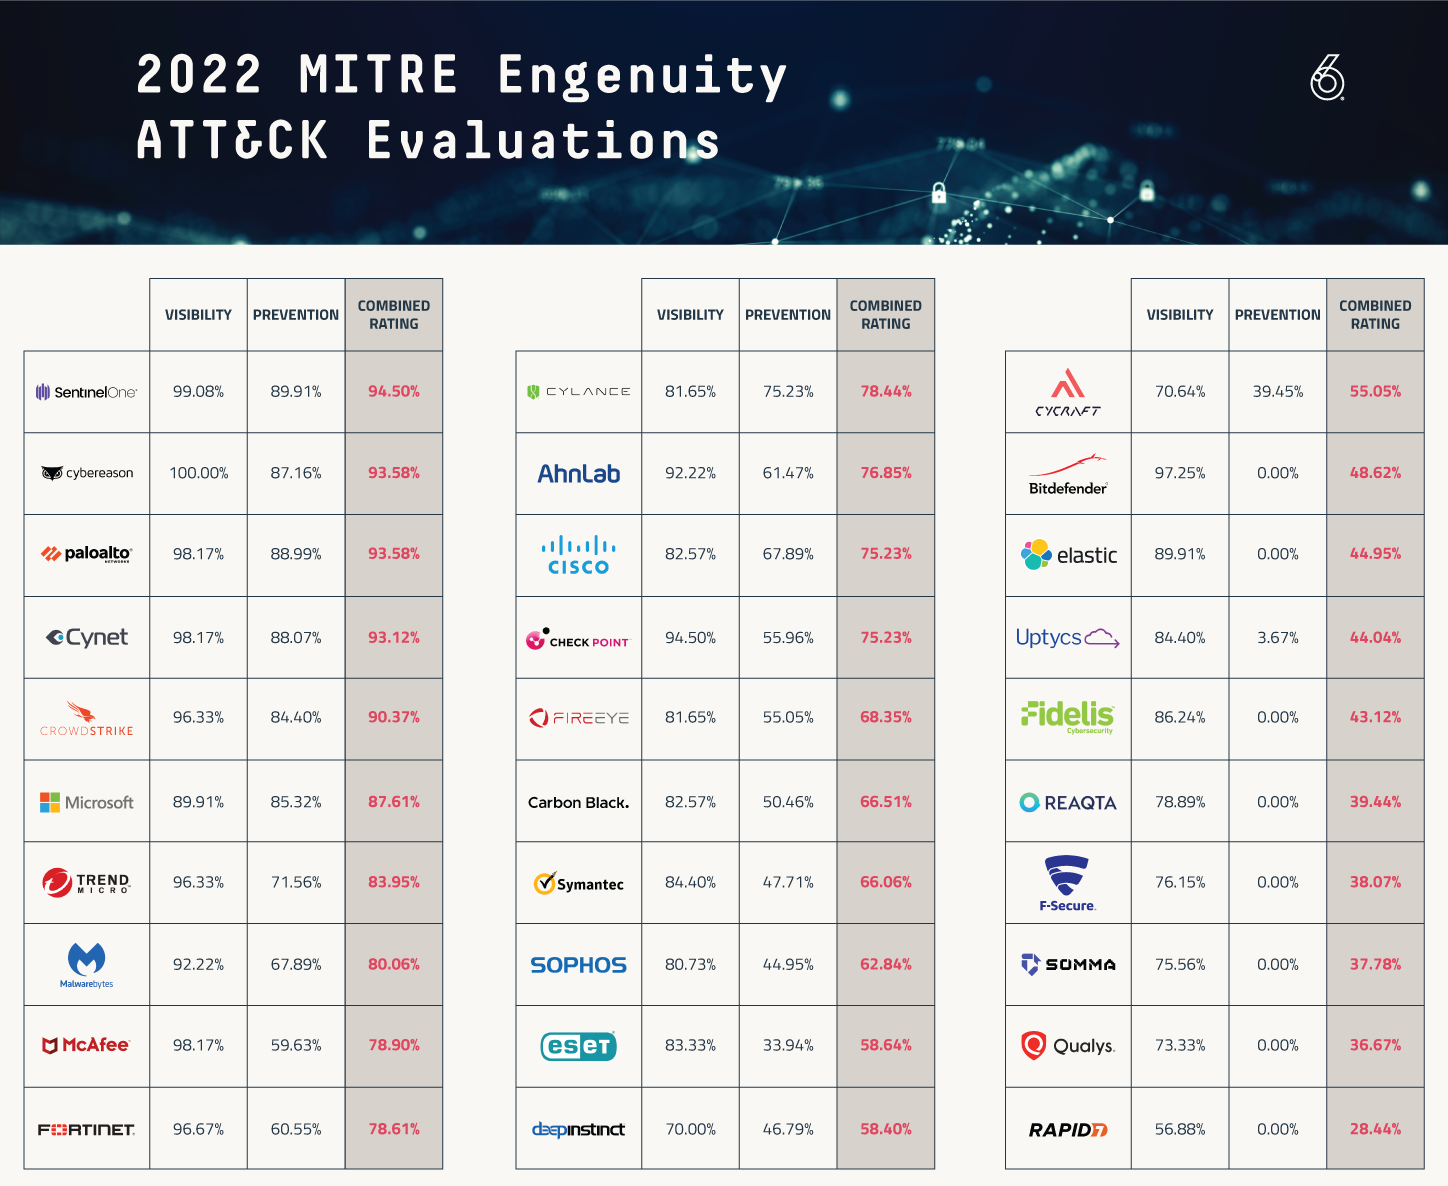 What You Need to Know About the 2022 MITRE Engenuity ATT&CK Evaluations